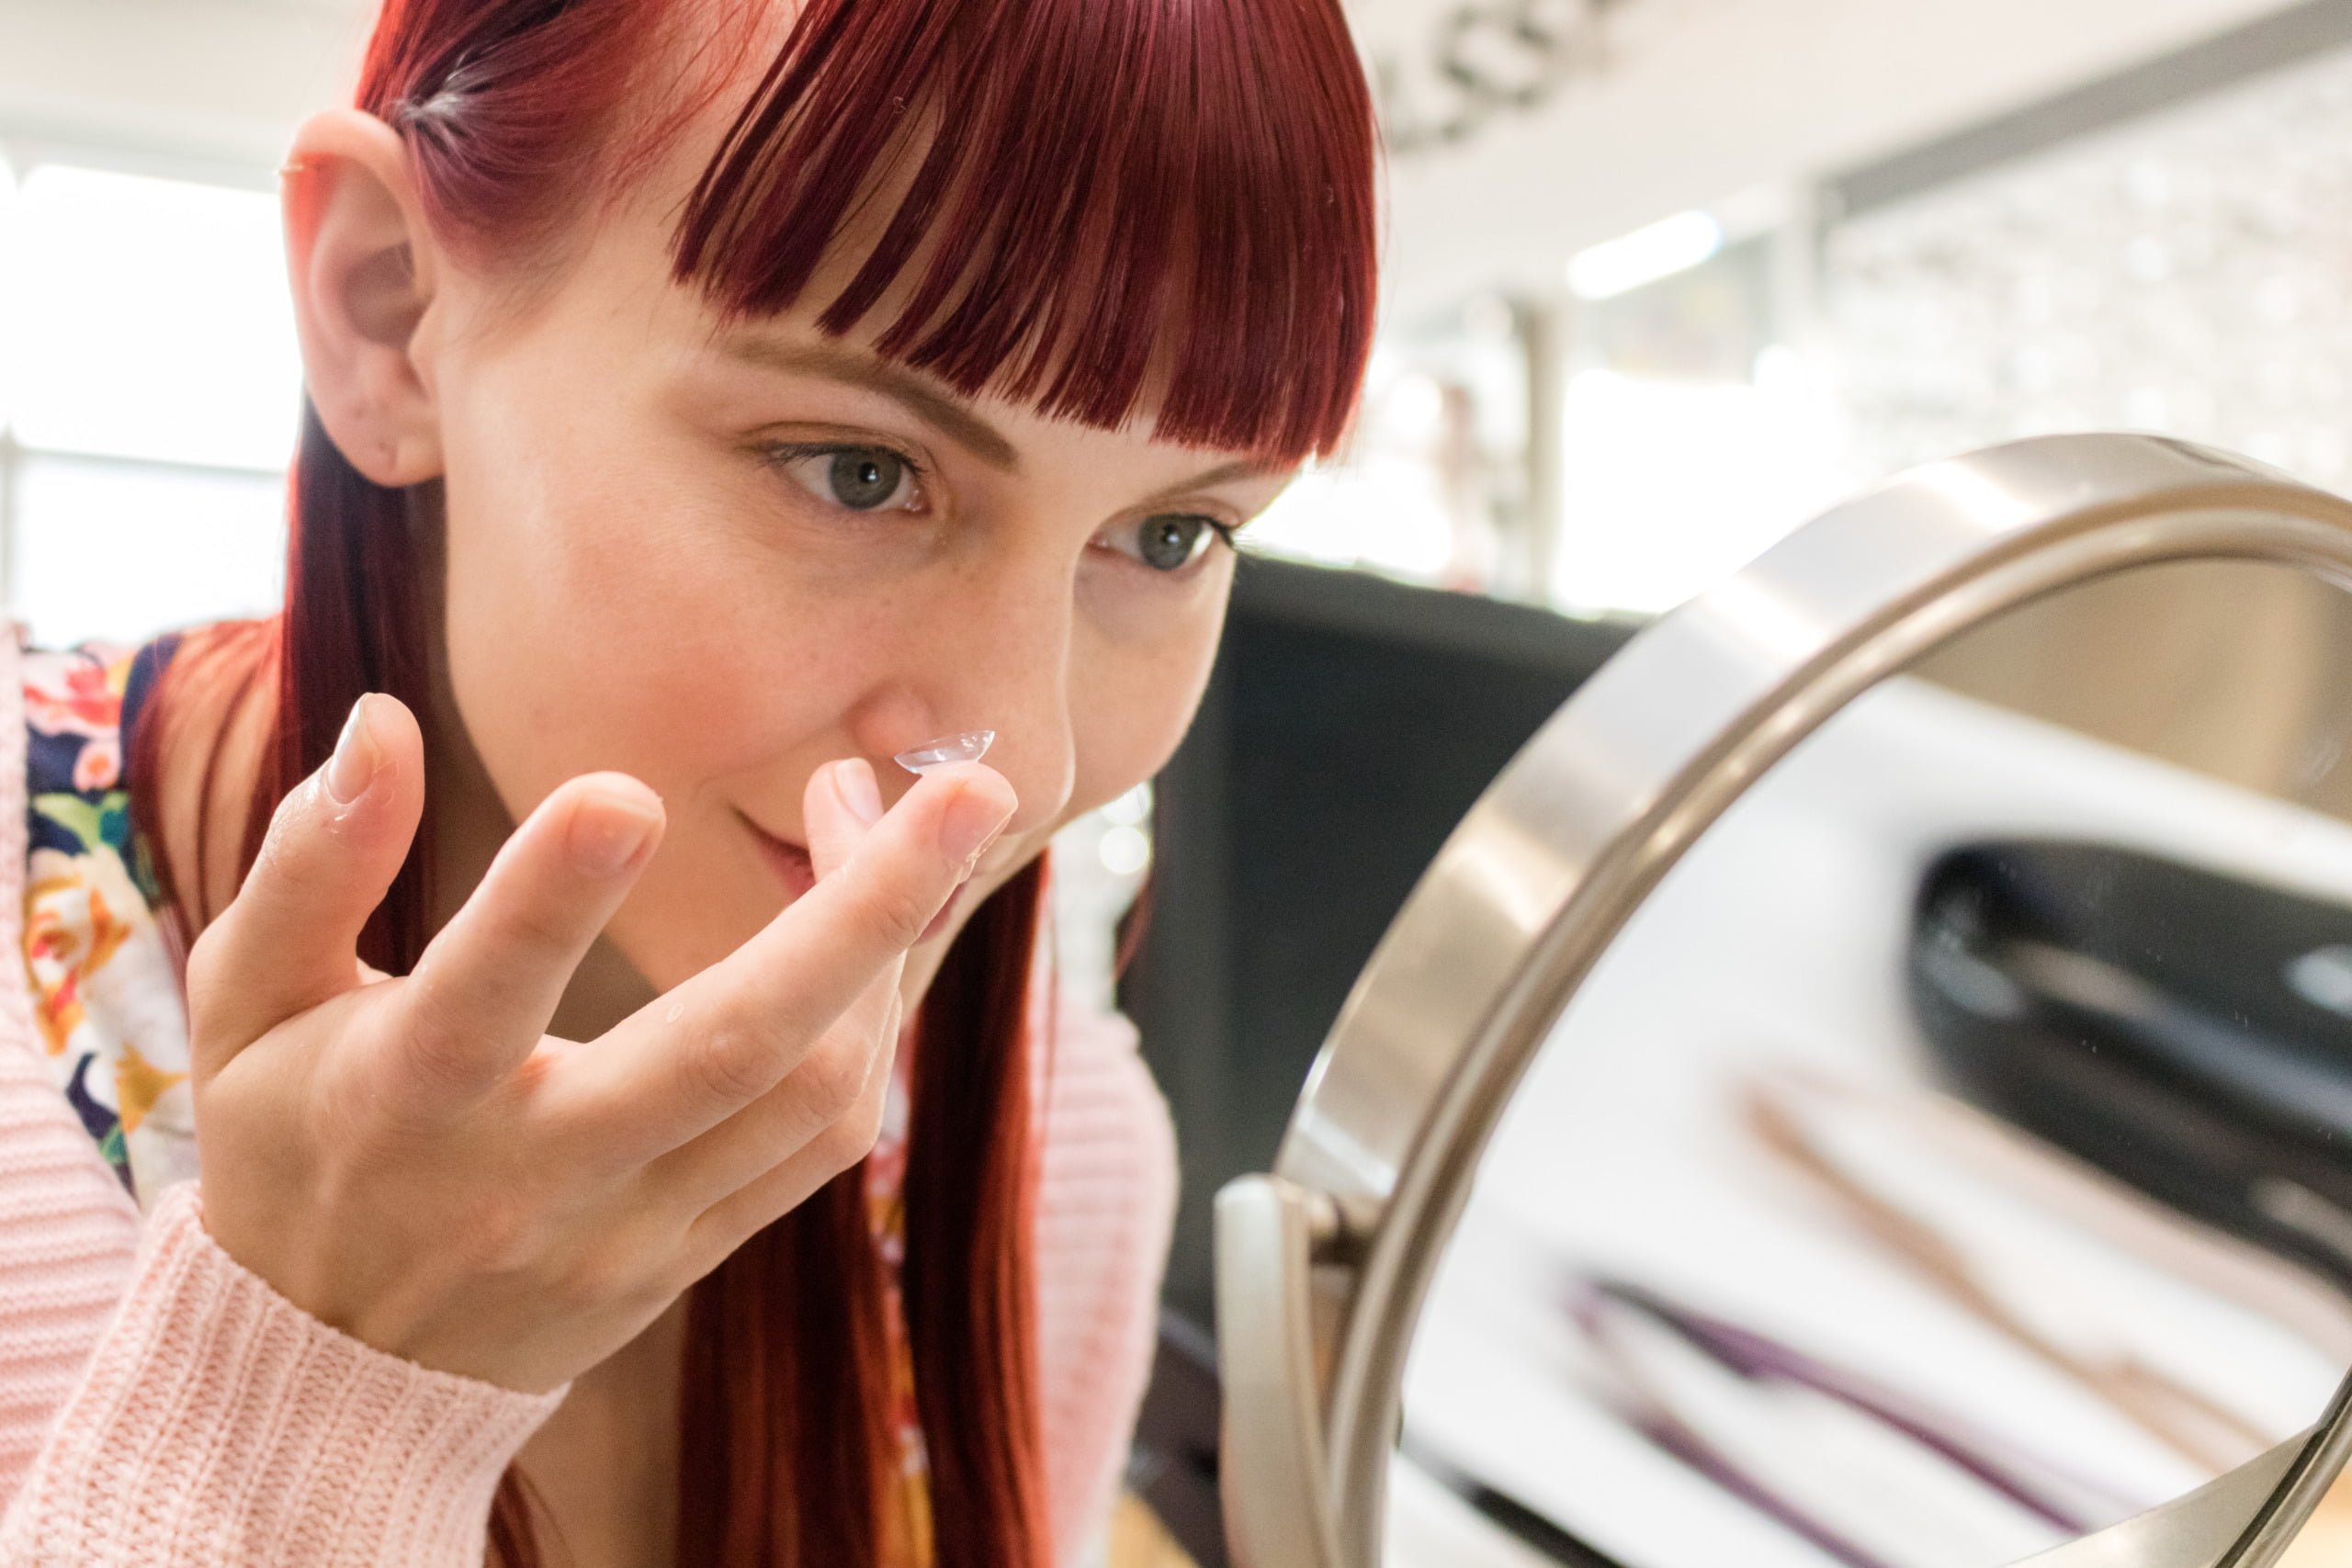 Are Daily Contacts Better than Other Contact Lenses?